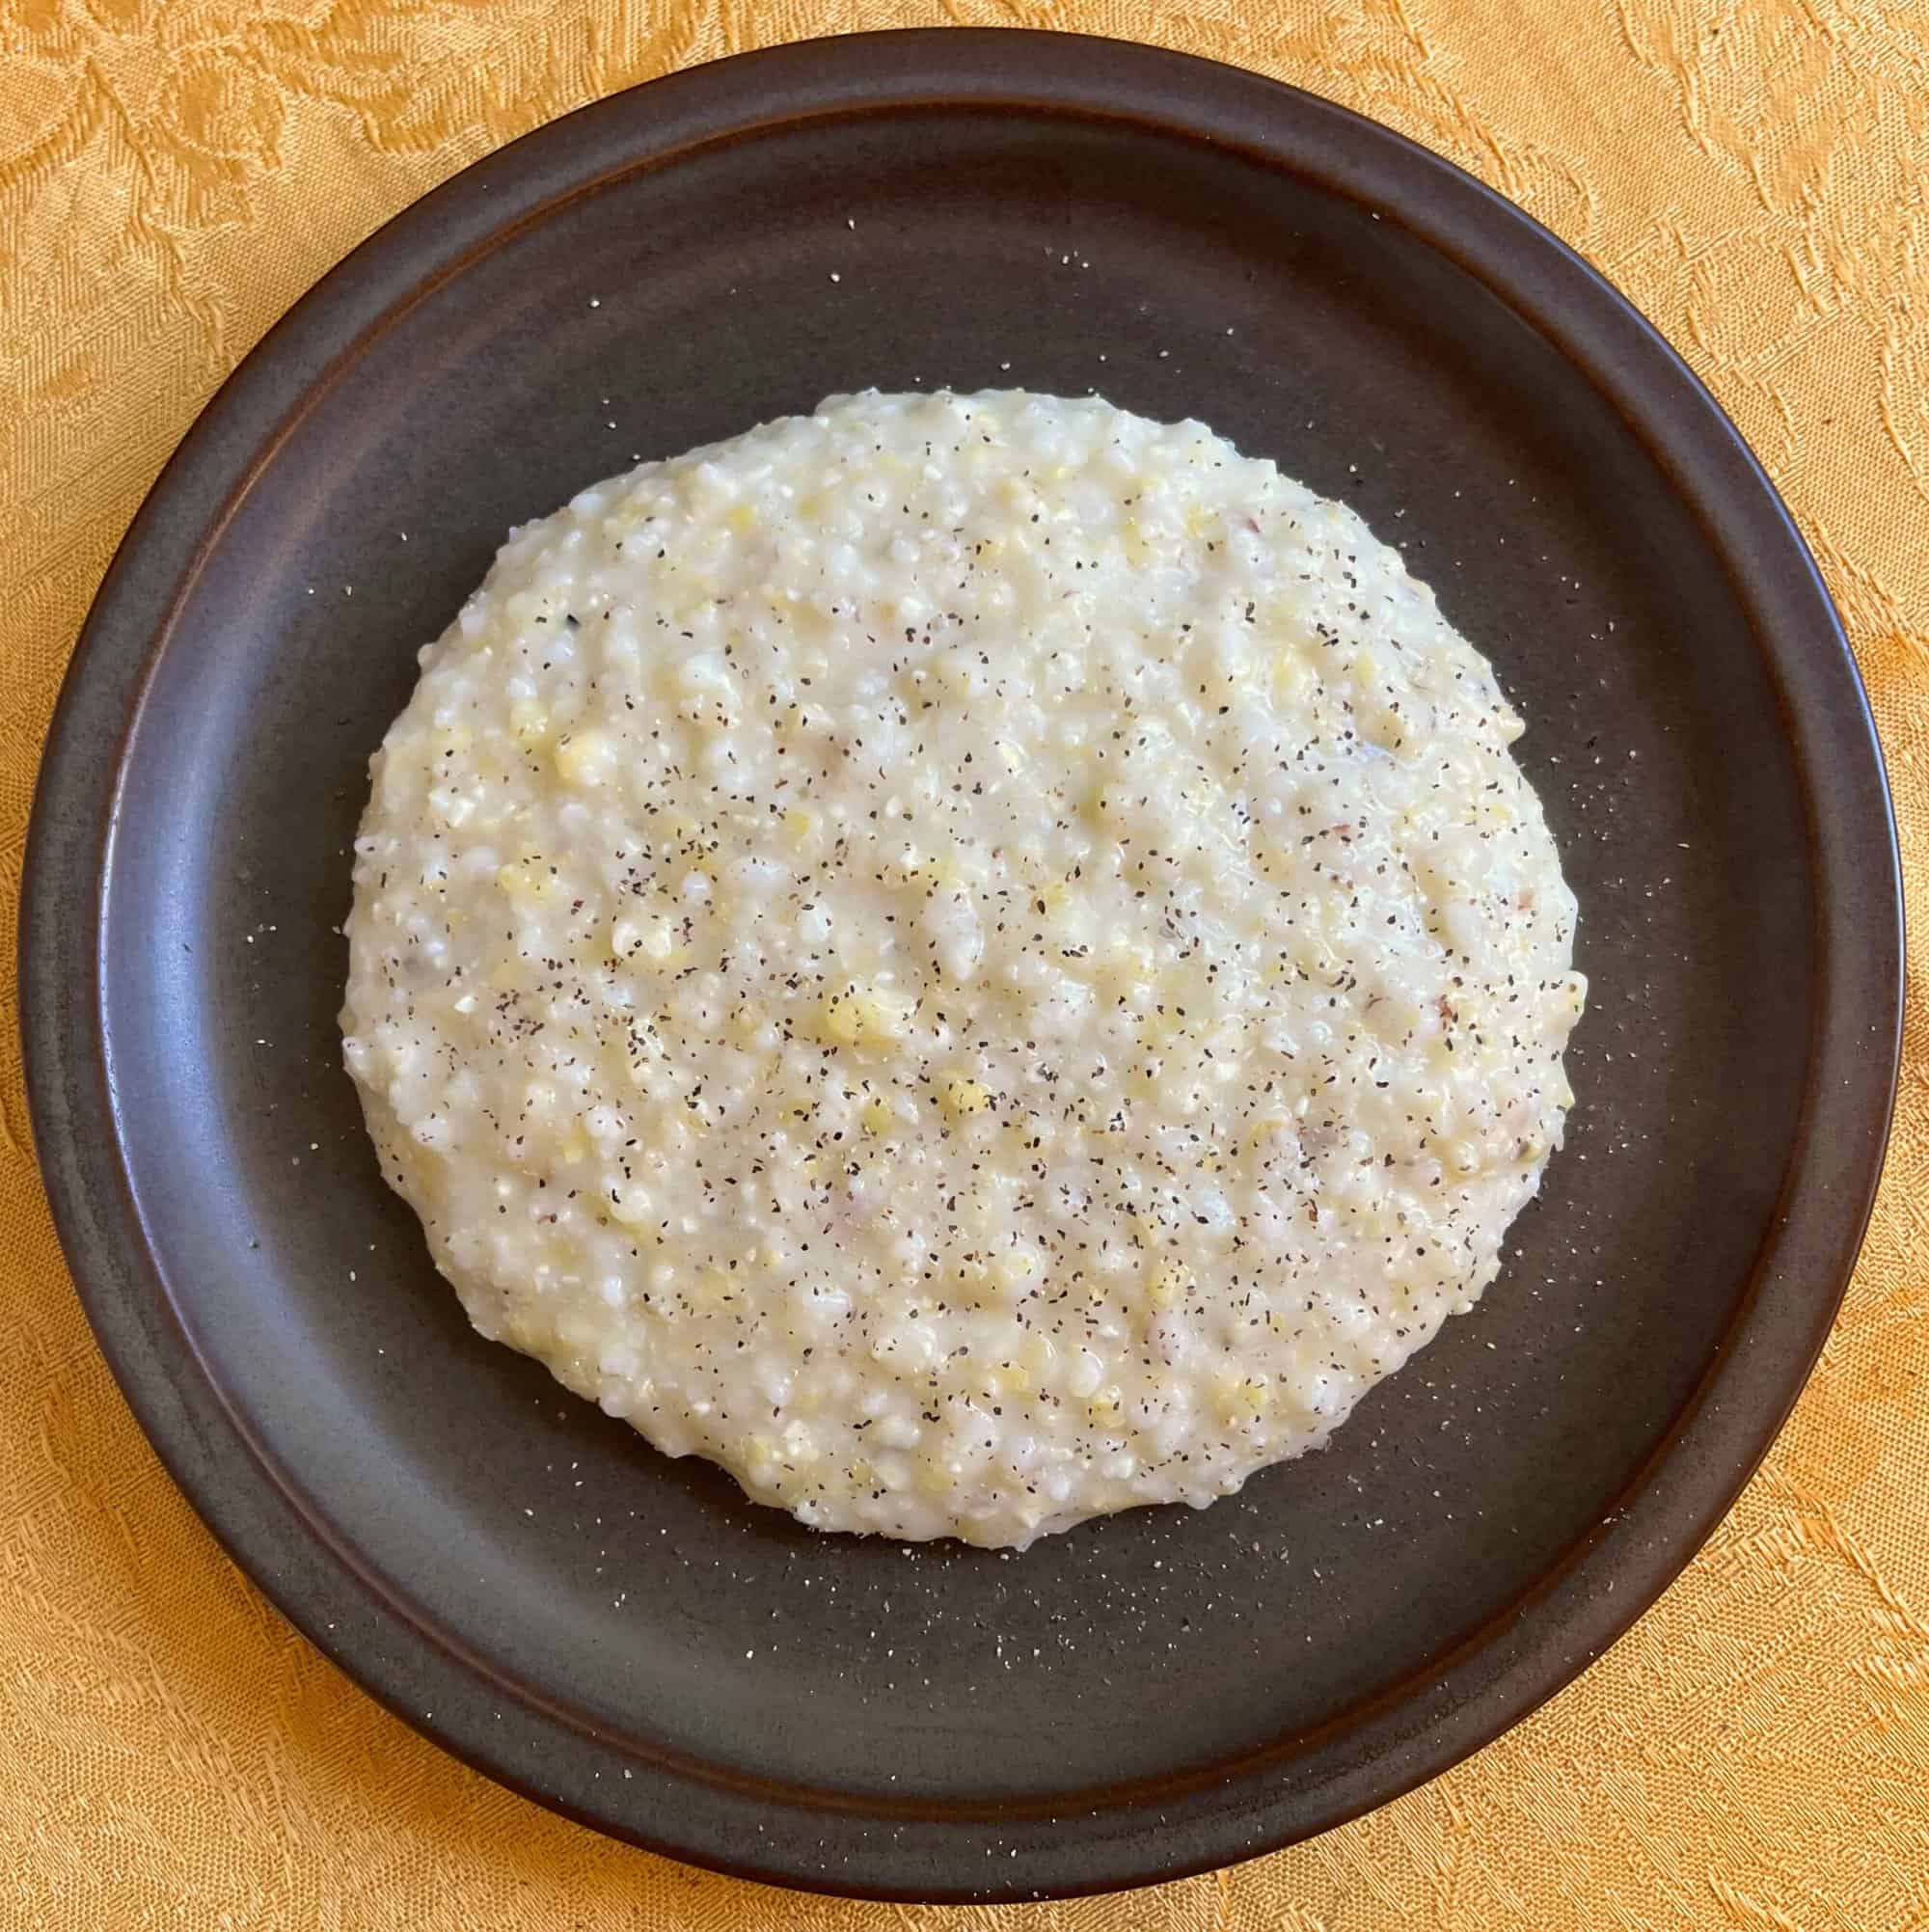 Liberation Farms Grits with black pepper